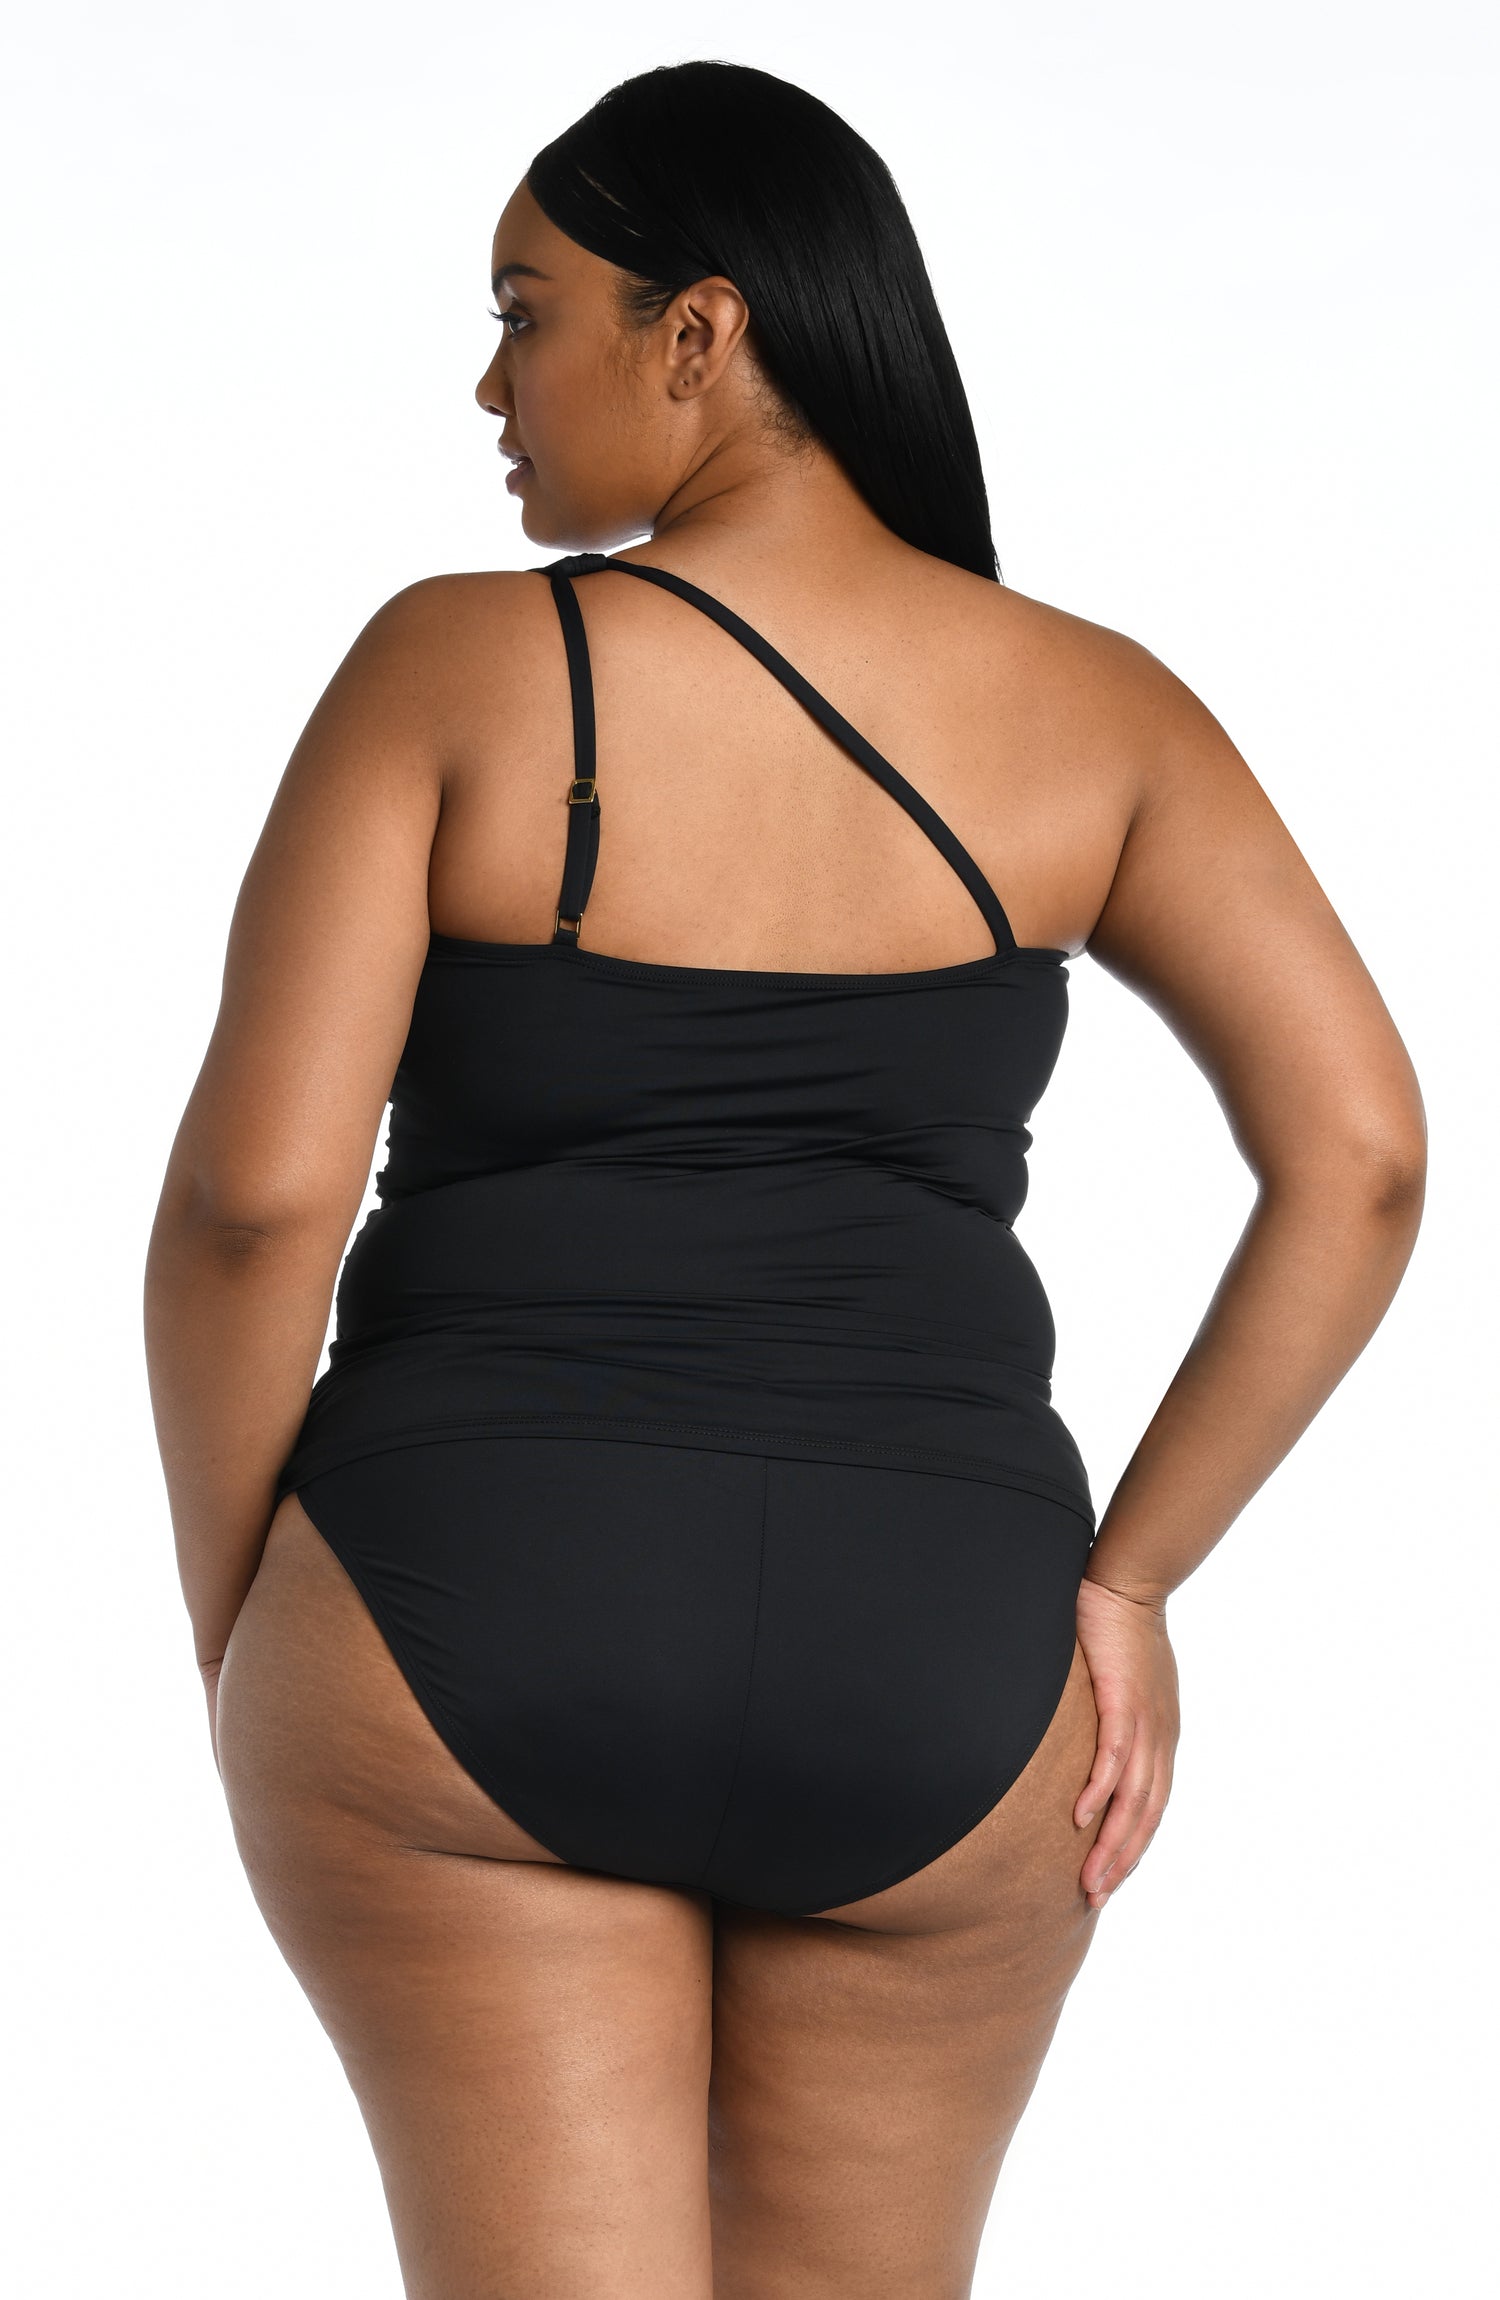 Model is wearing a black tankini swimsuit top from our Best-Selling Island Goddess collection.